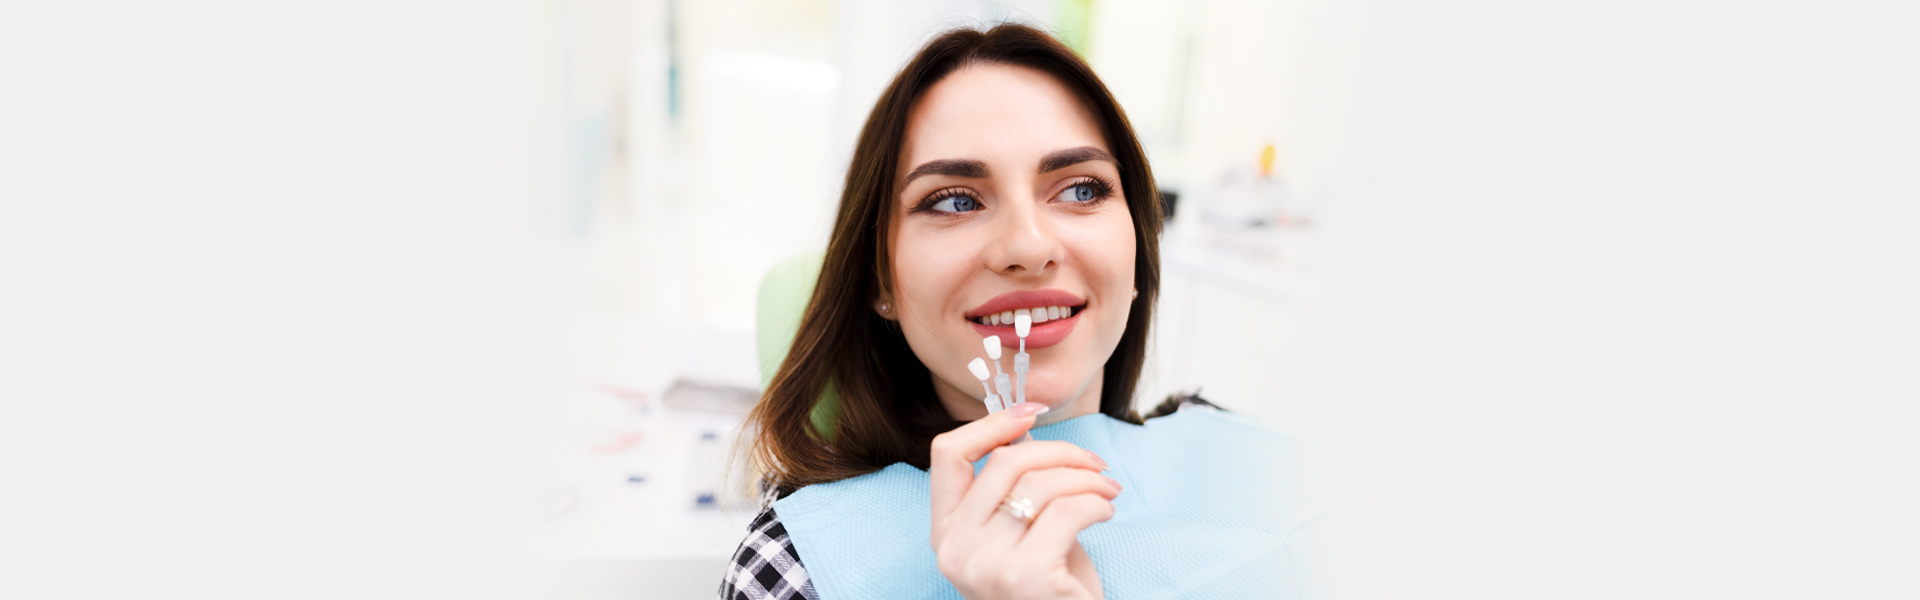 What Are the Amazing Advantages of Dental Veneers Over Other Procedures